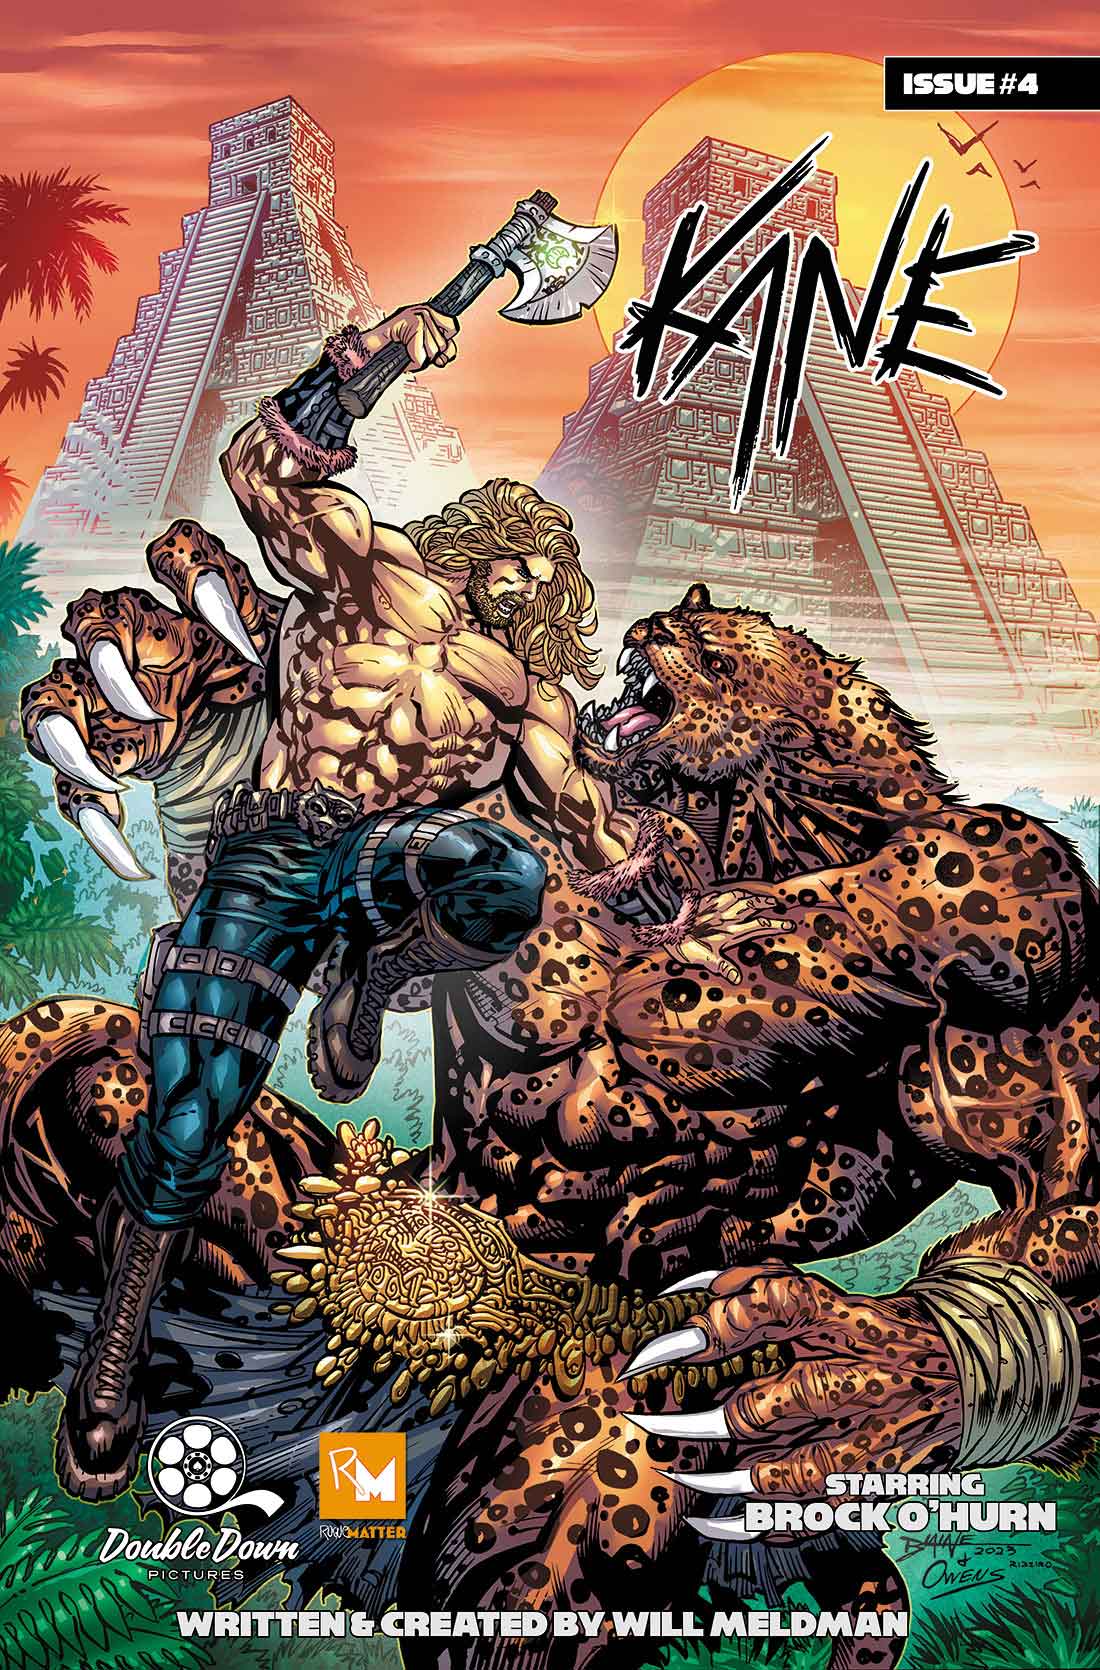 Man holding large axe on cover of Kane, intense and powerful image created by WILL MELDMAN